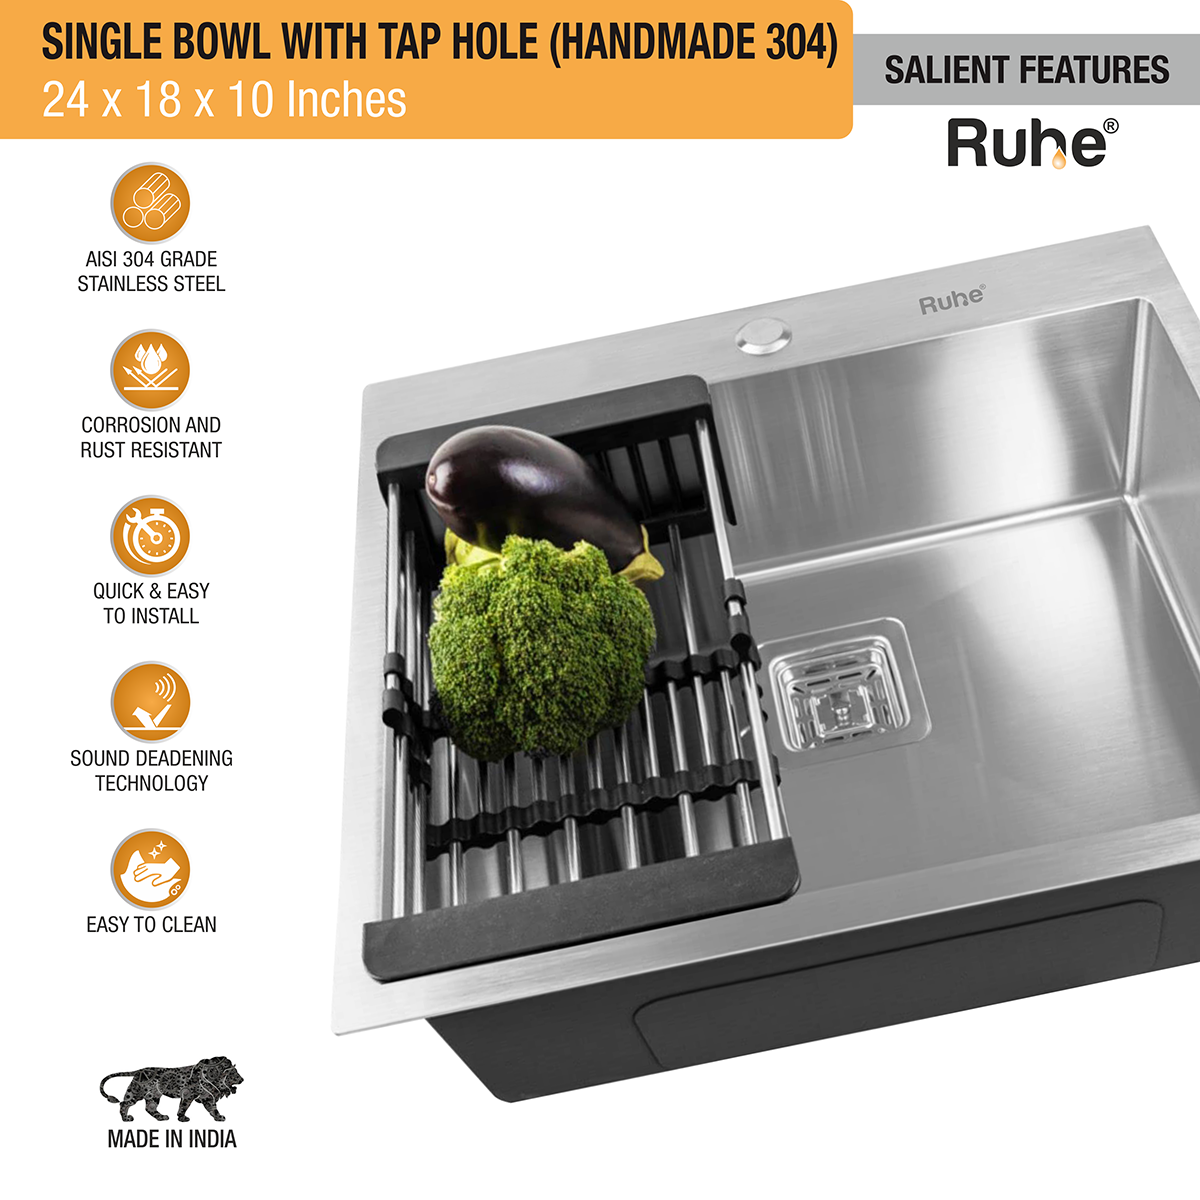 Handmade Single Bowl 304-Grade Kitchen Sink (24 x 18 x 10 Inches) with Tap Hole features and benefits